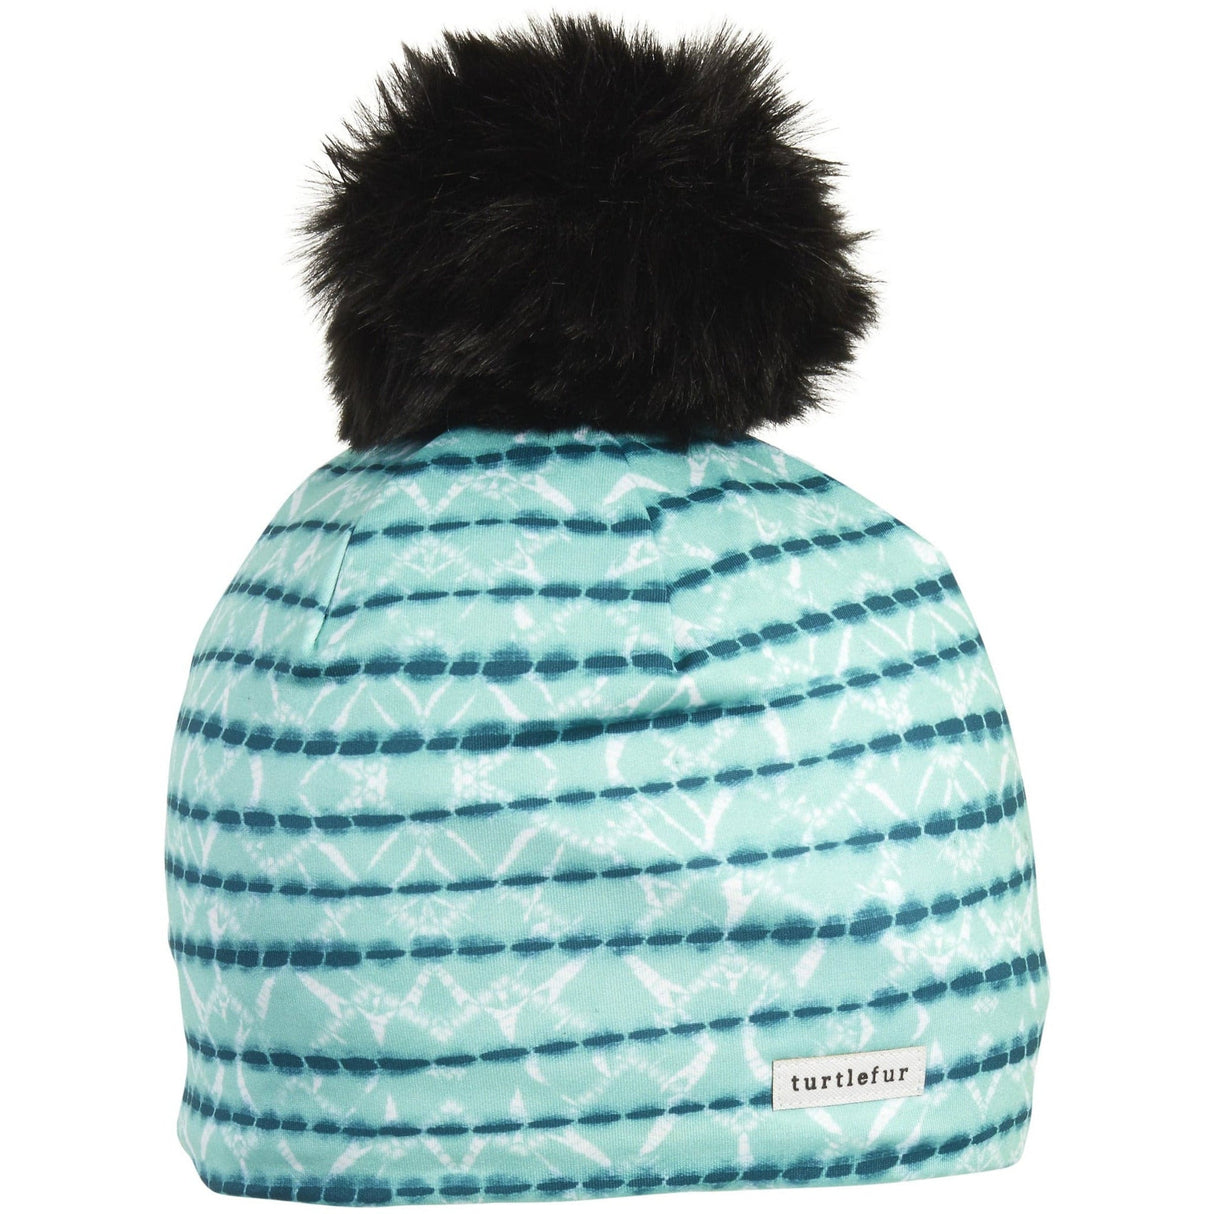 Turtle Fur Comfort Shell Pom Pom Beanie  -  One Size Fits Most / Cool Illusion